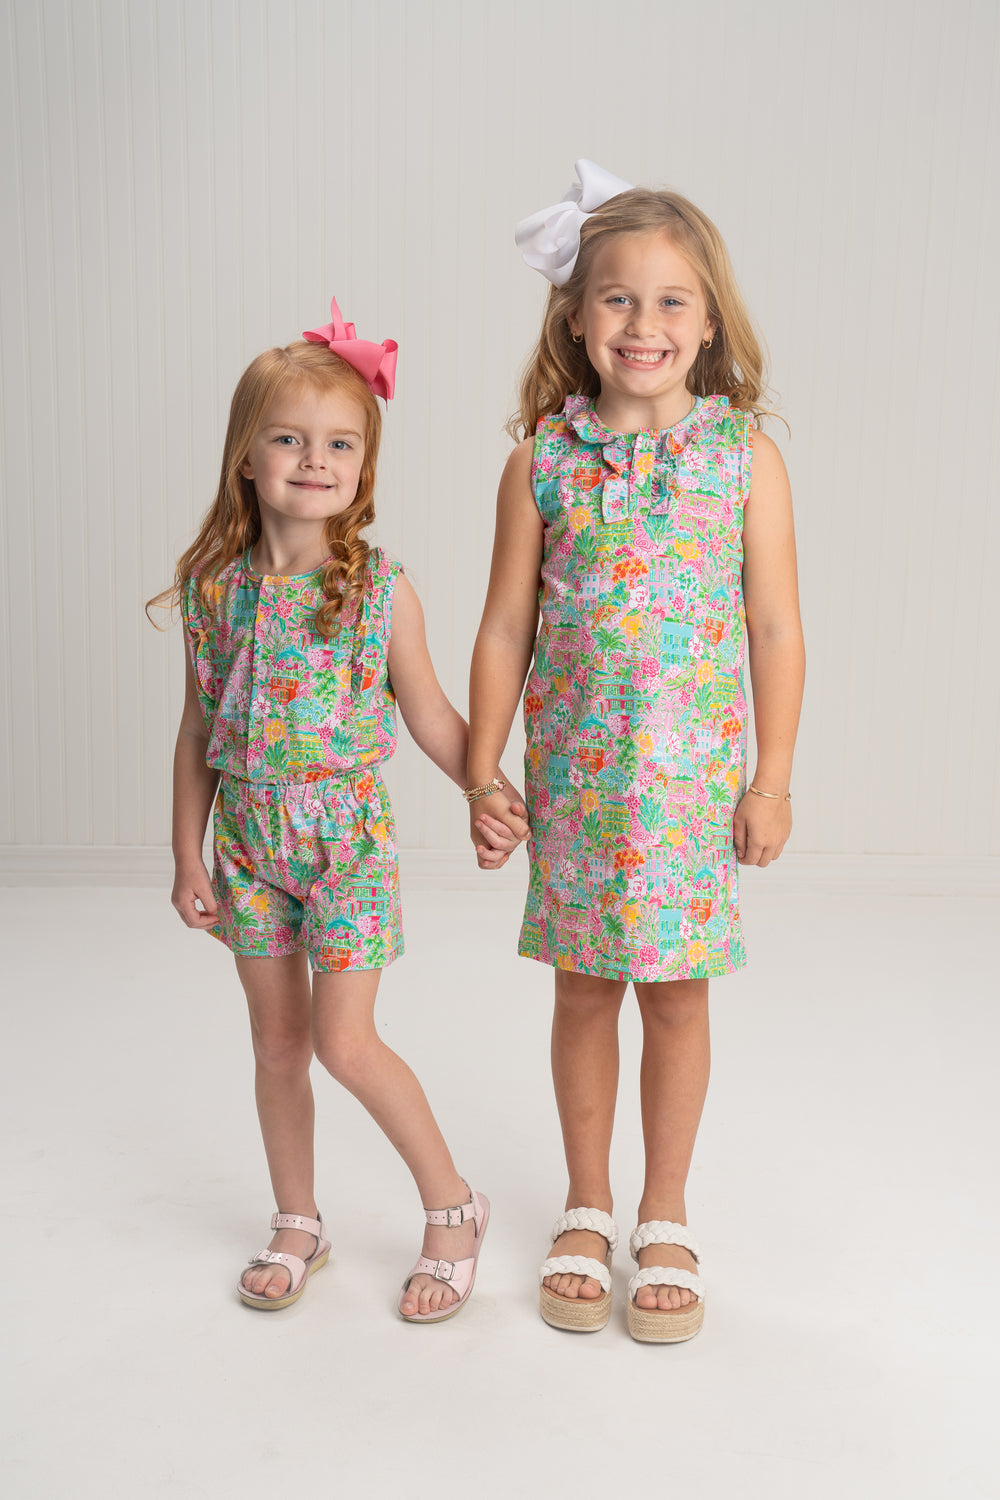 Timeless Designs for Classic Kids – The Oaks Apparel Co.